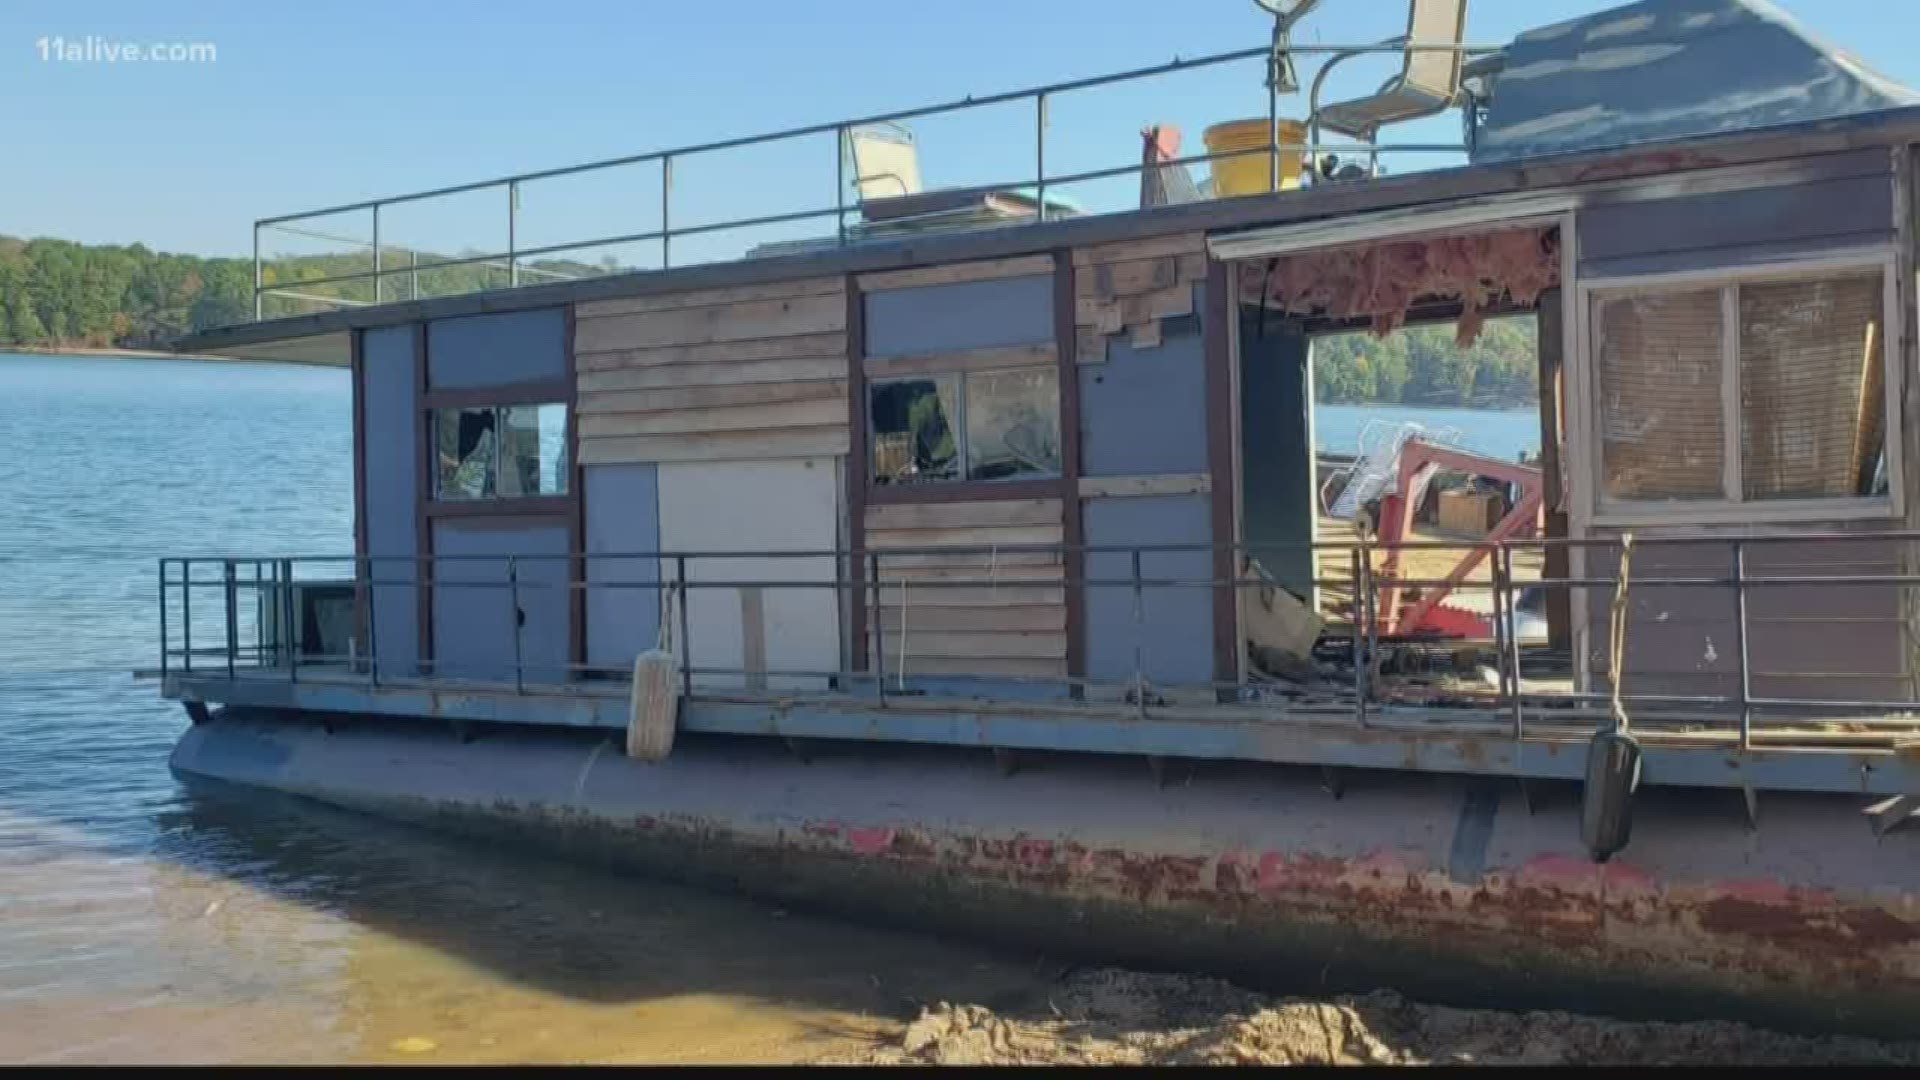 Three boats were removed last week from Lake Lanier, after being abandoned  six to twelve months ago. They were found in one of the many coves along Lake Lanier's al